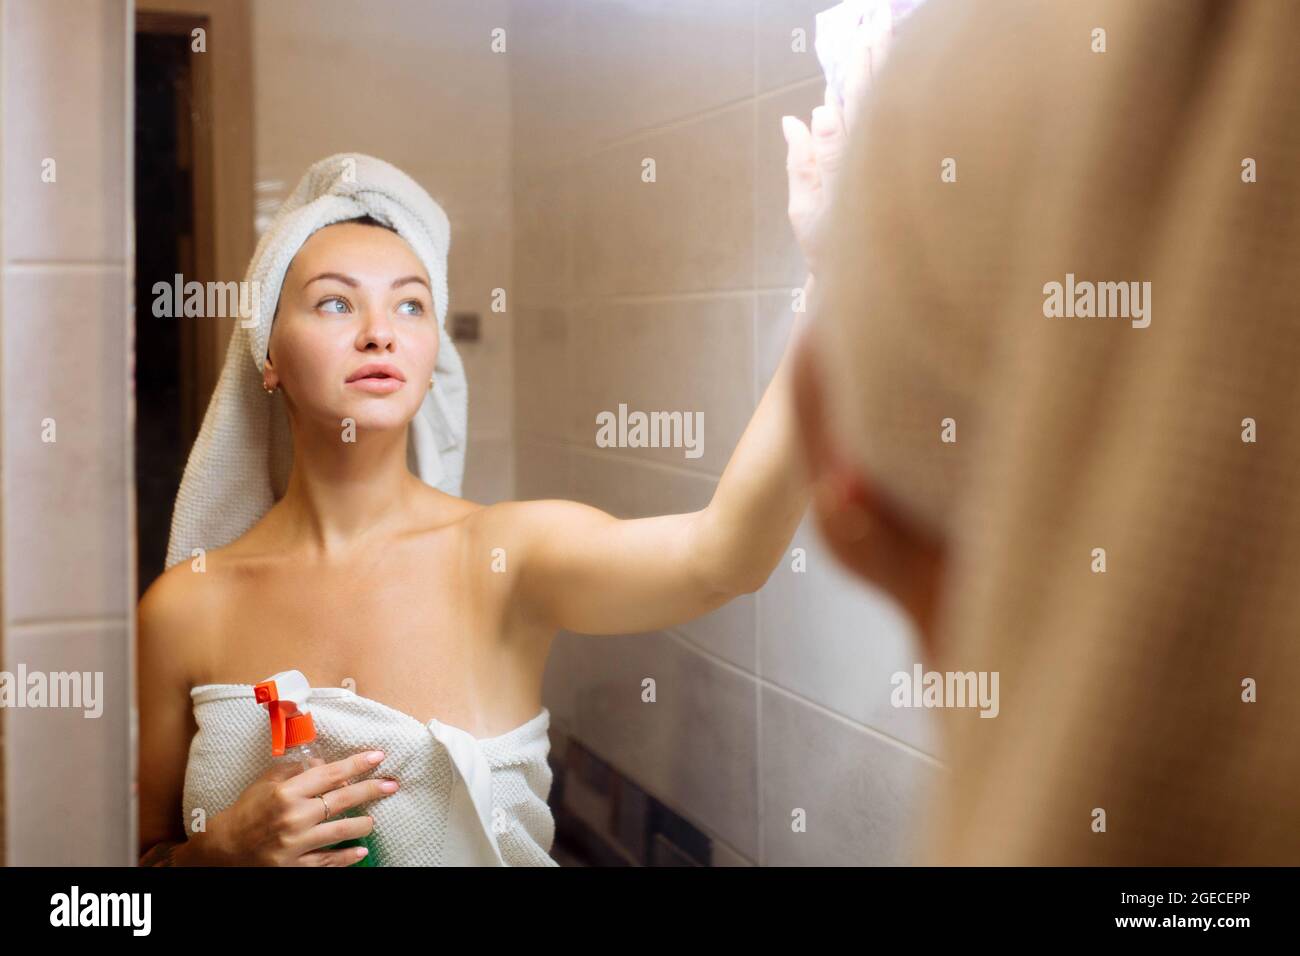 Cleaning in the shower room. A beautiful girl washes the mirror with a rag Stock Photo